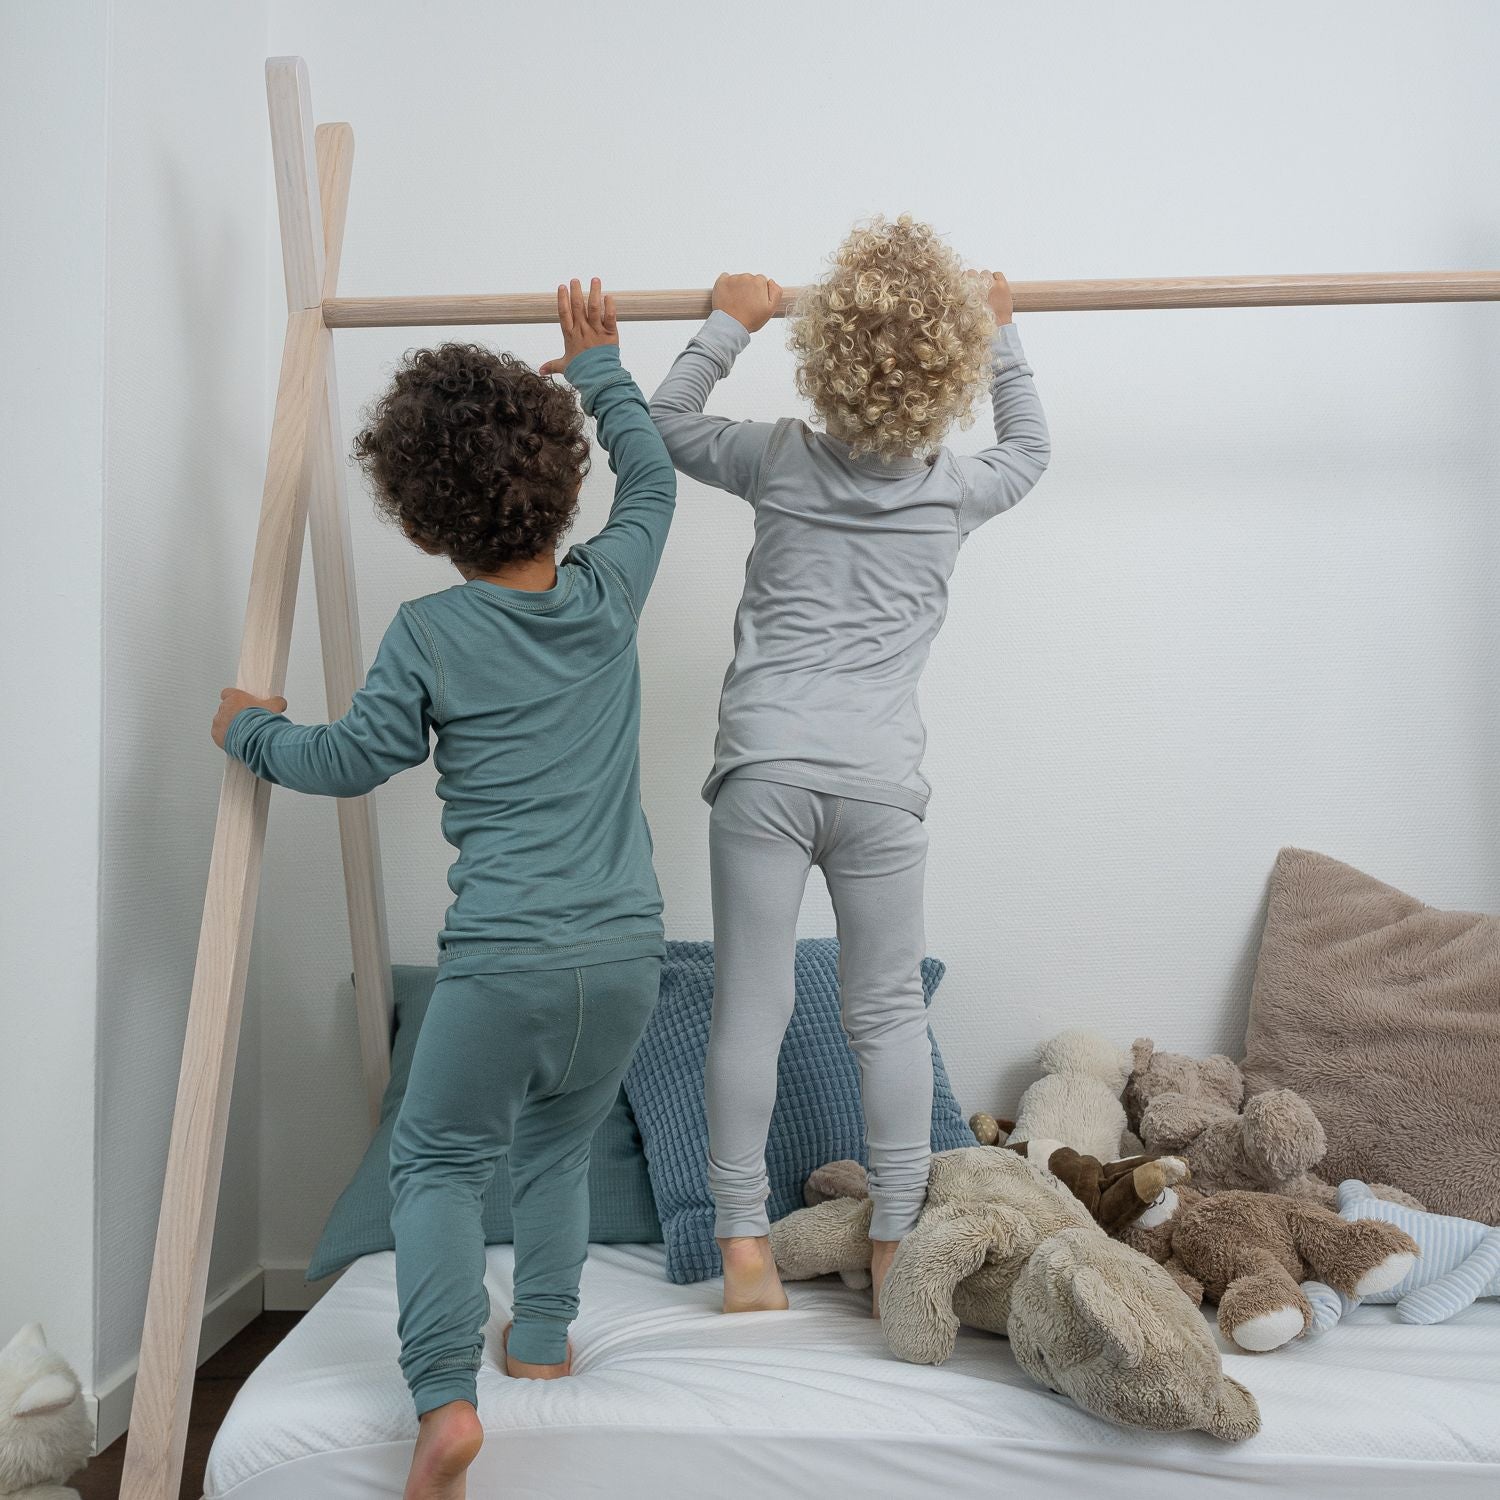 Boys Wearing Allergy-friendly Clothing From SOOTHLA Playing On Toddler Bed